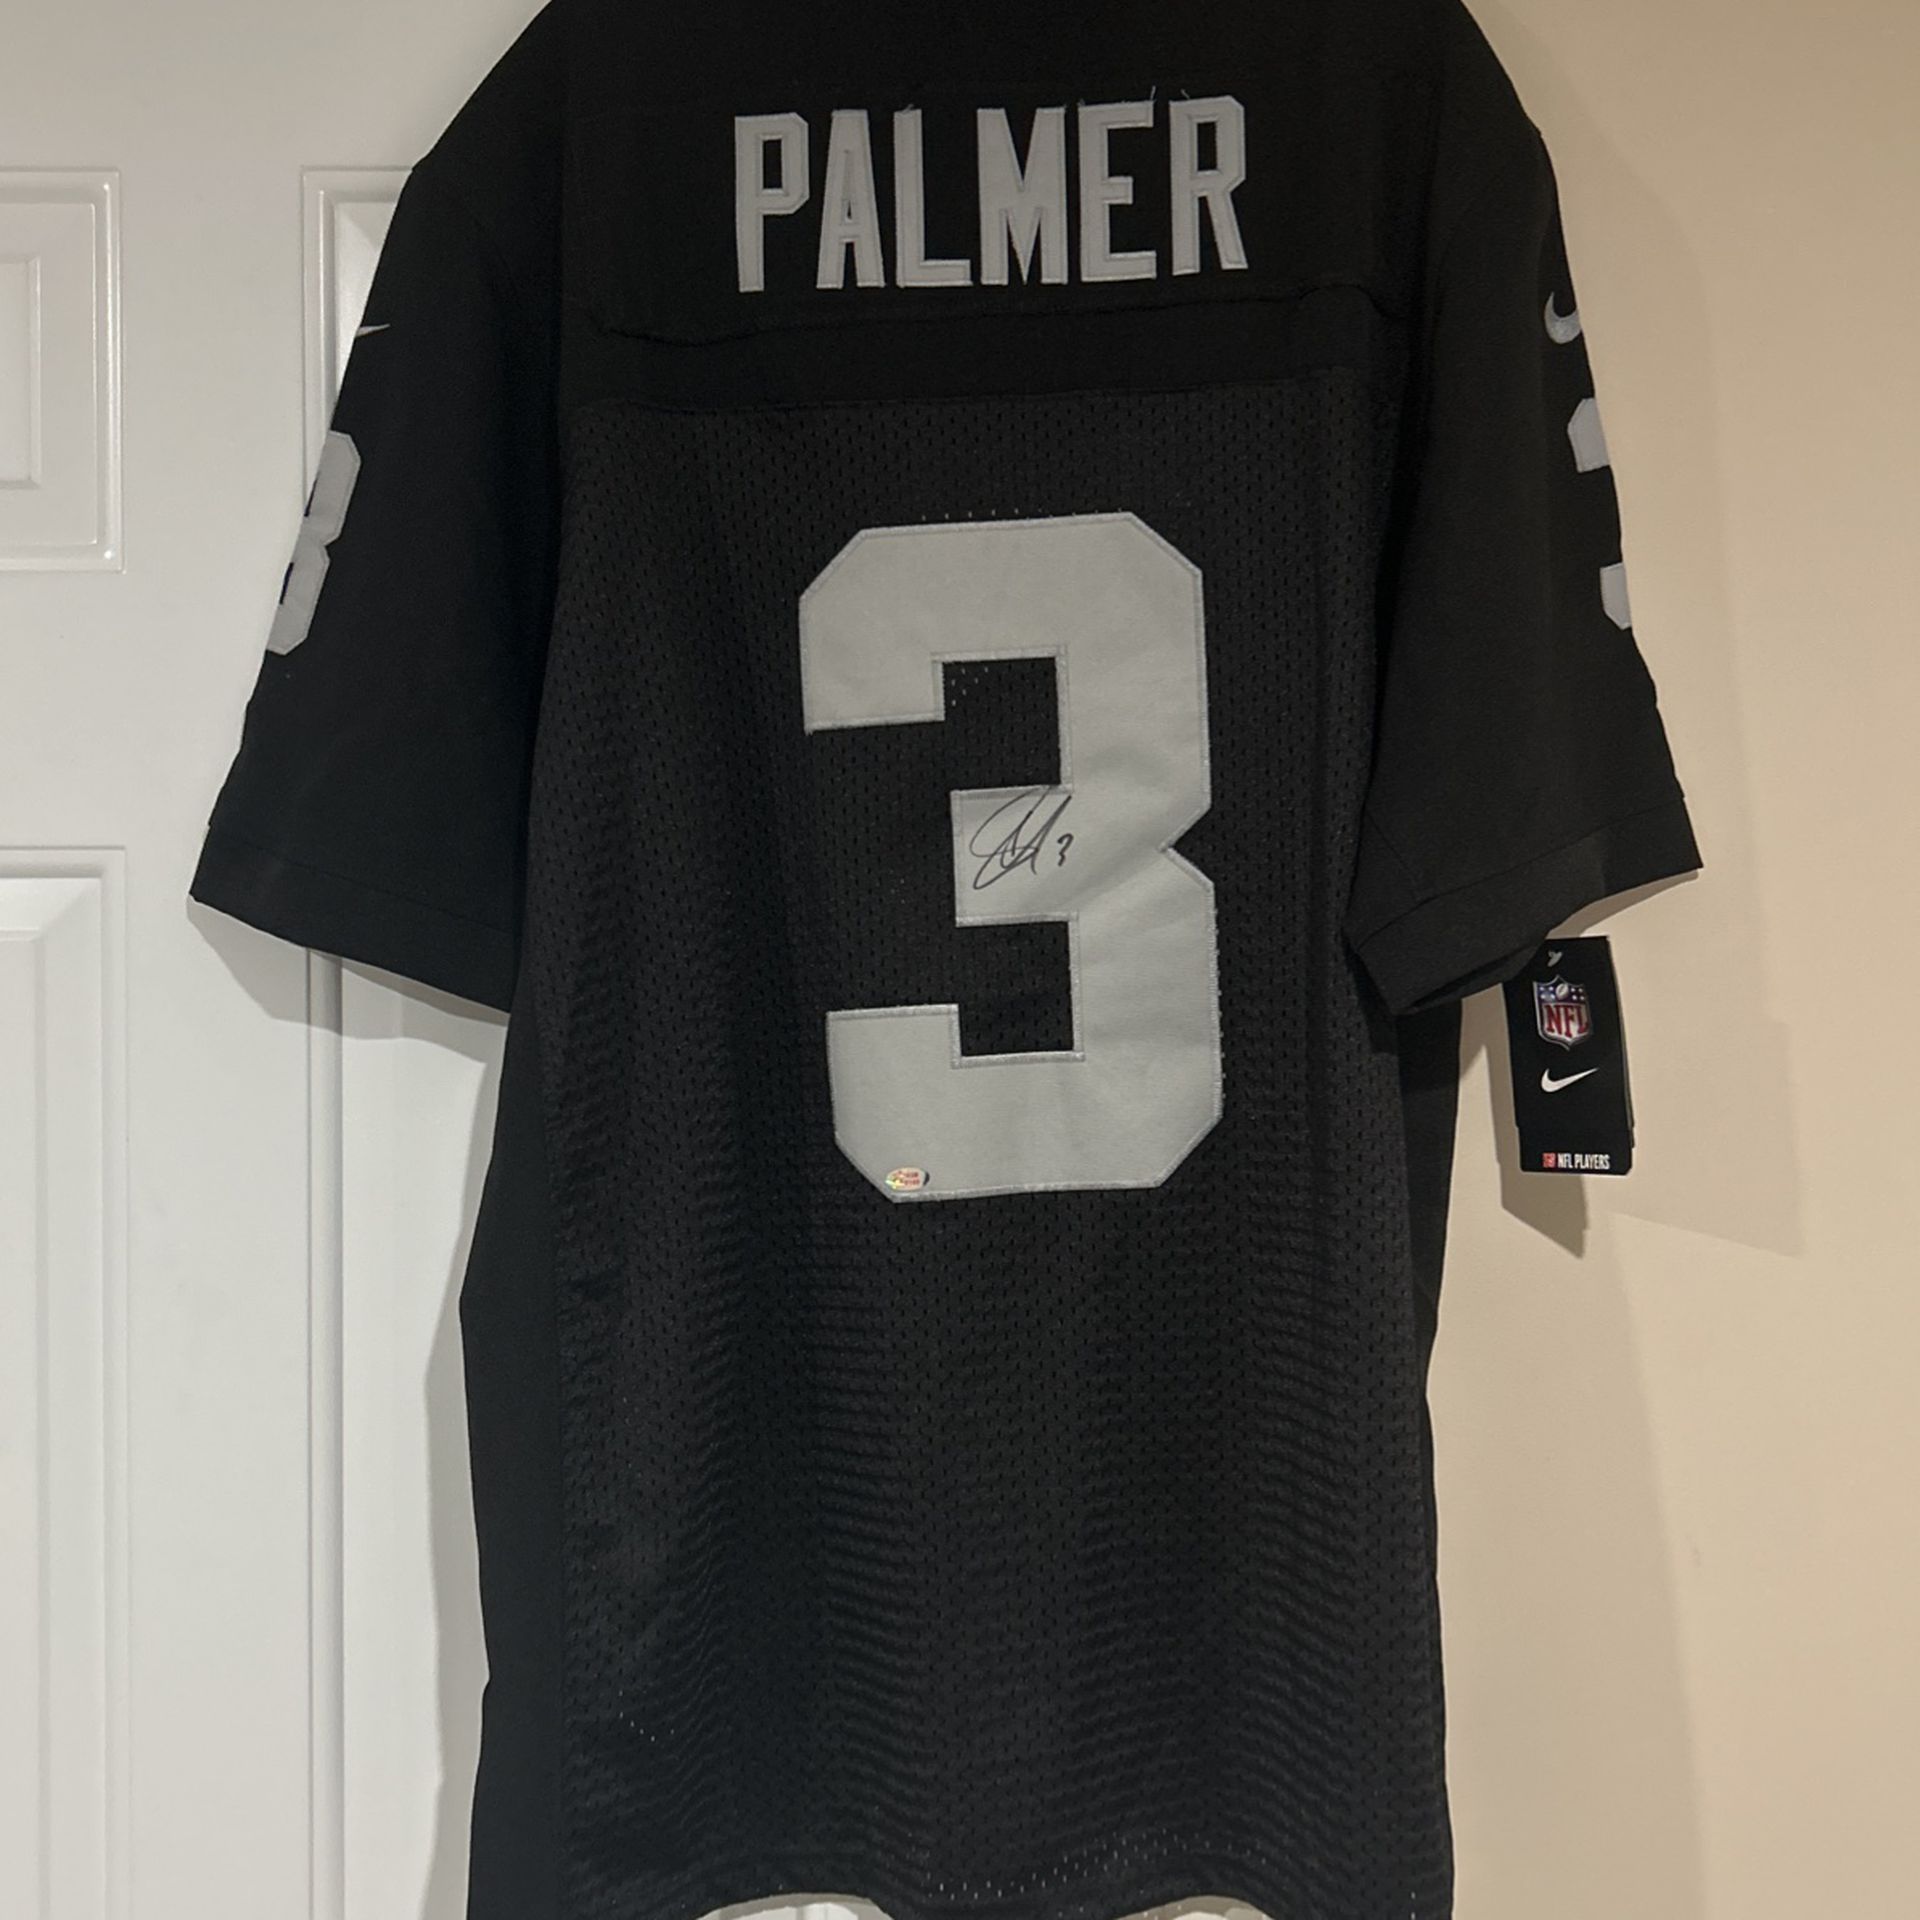 Carson Palmer Raiders Autographed Jersey